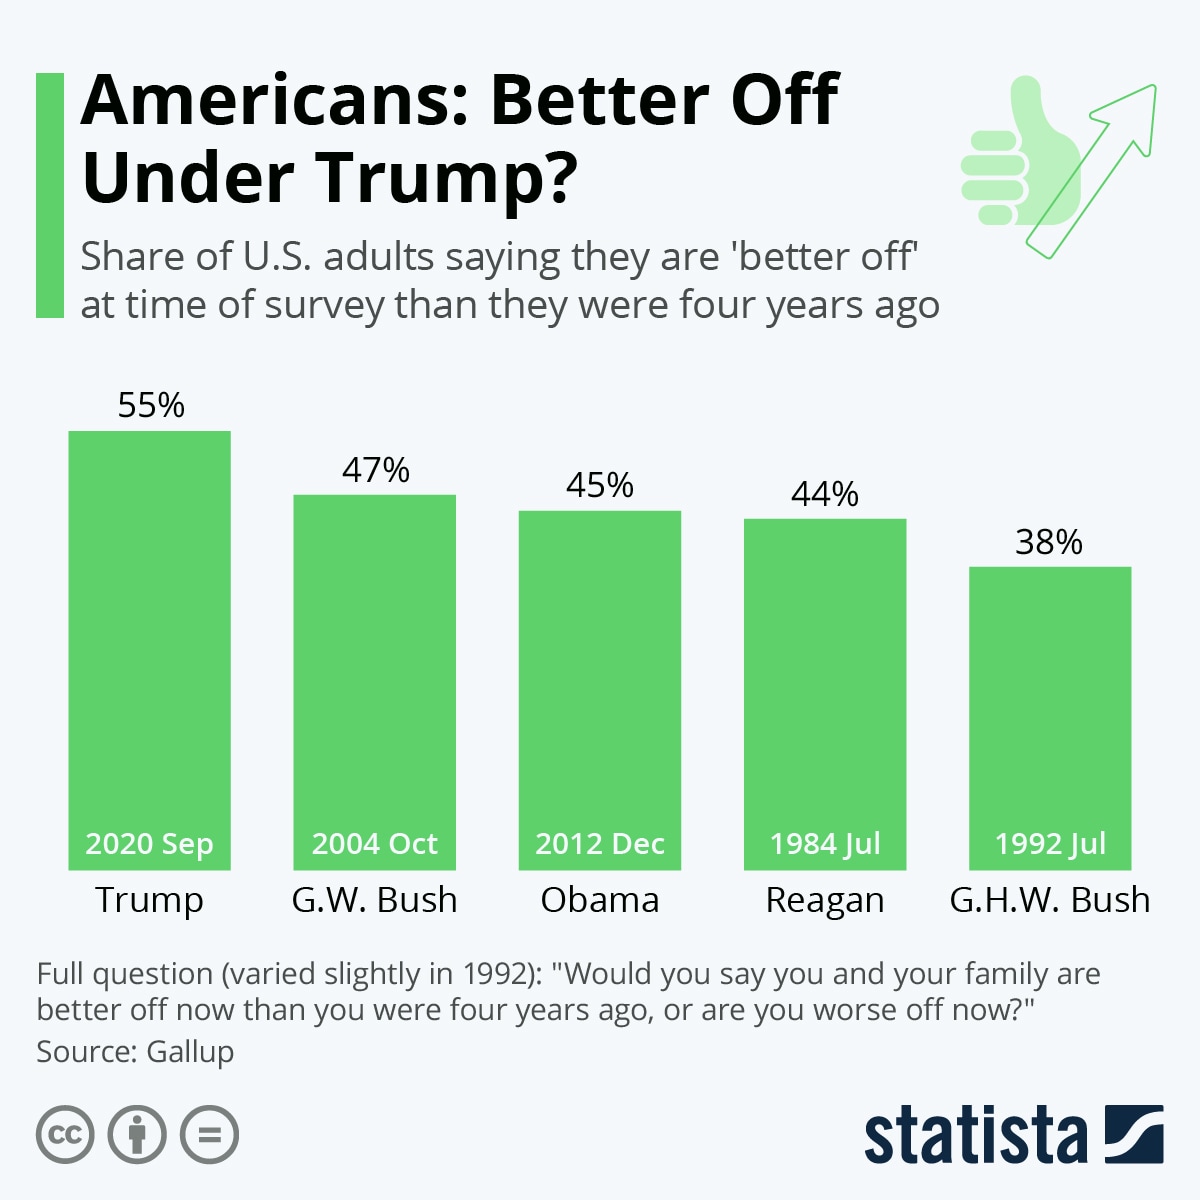 Poll shows majority of Americans believe they are better off under Trump